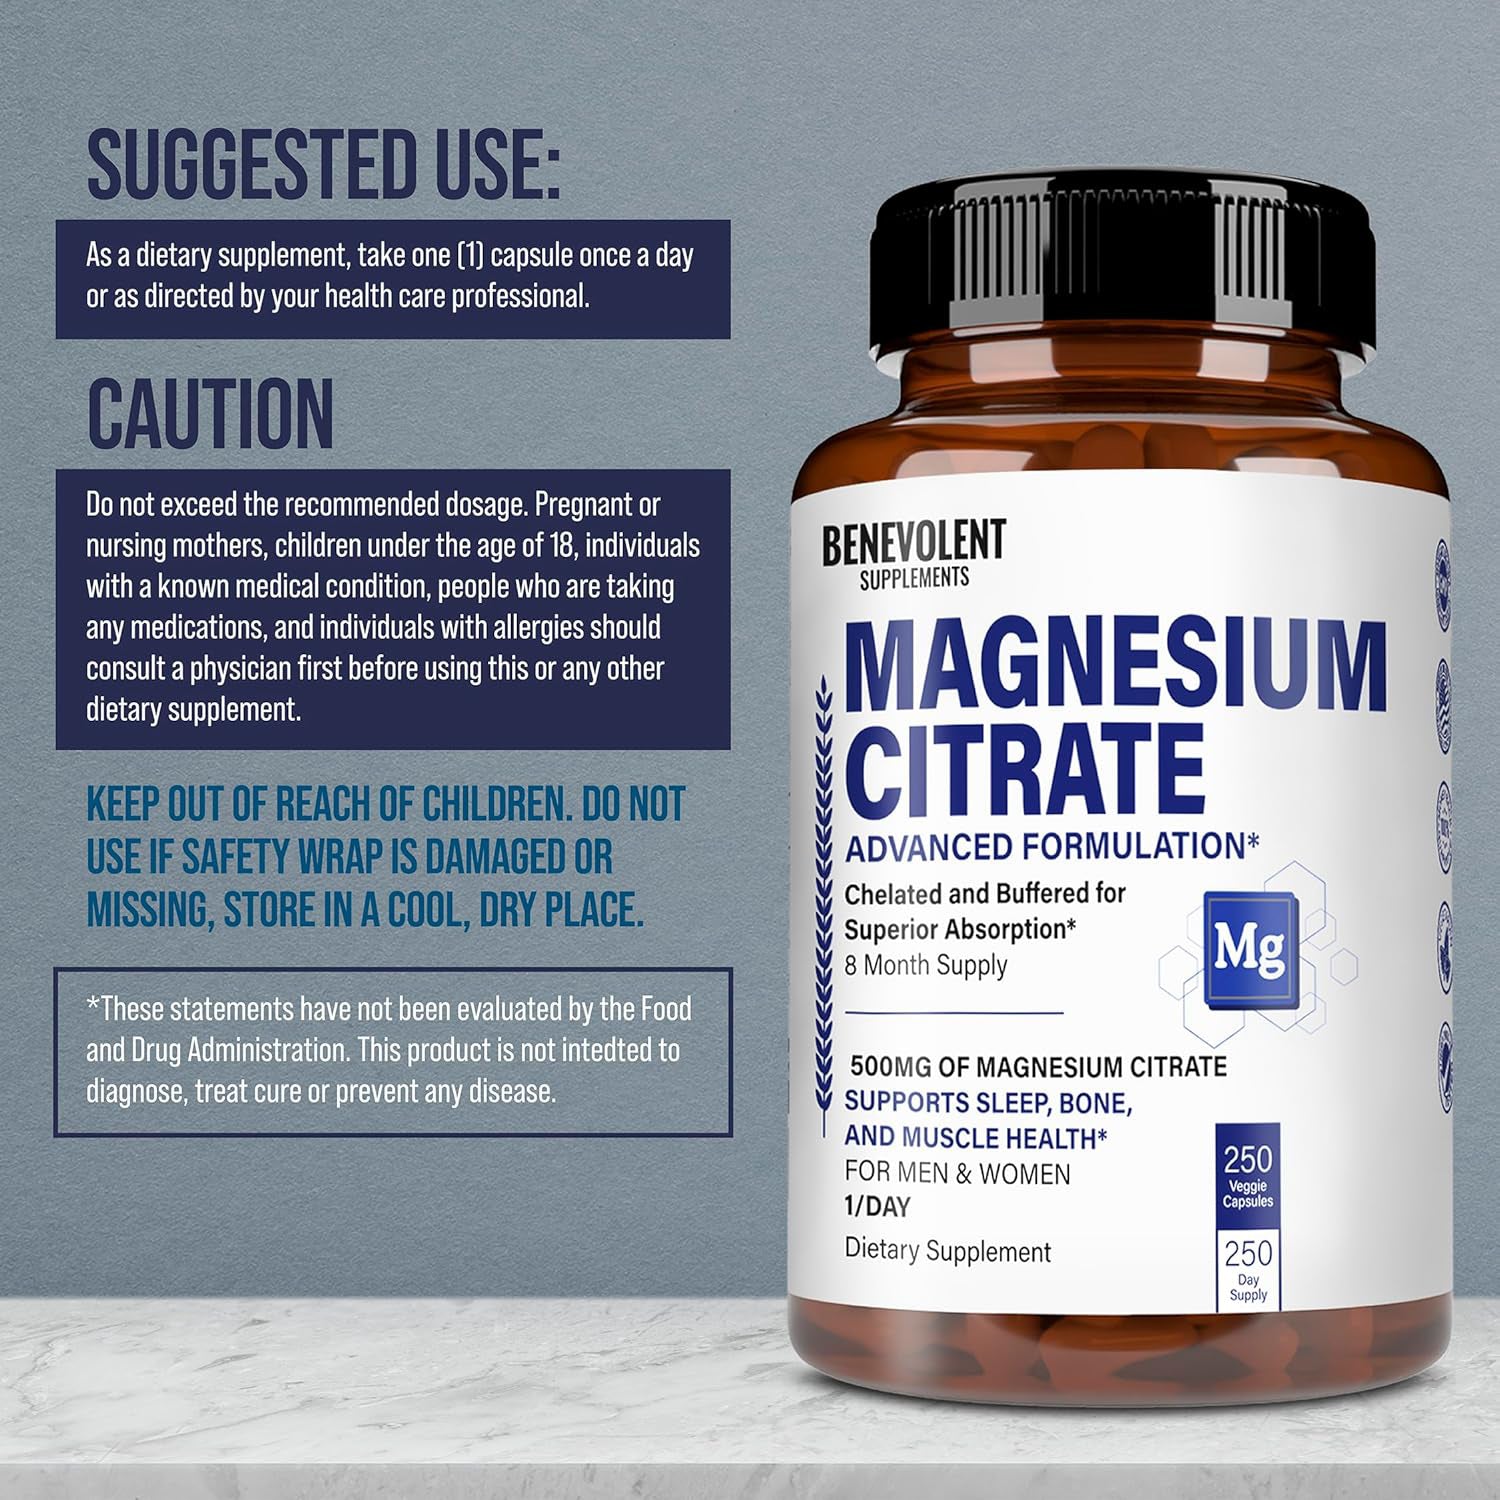 Magnesium Citrate suggested use